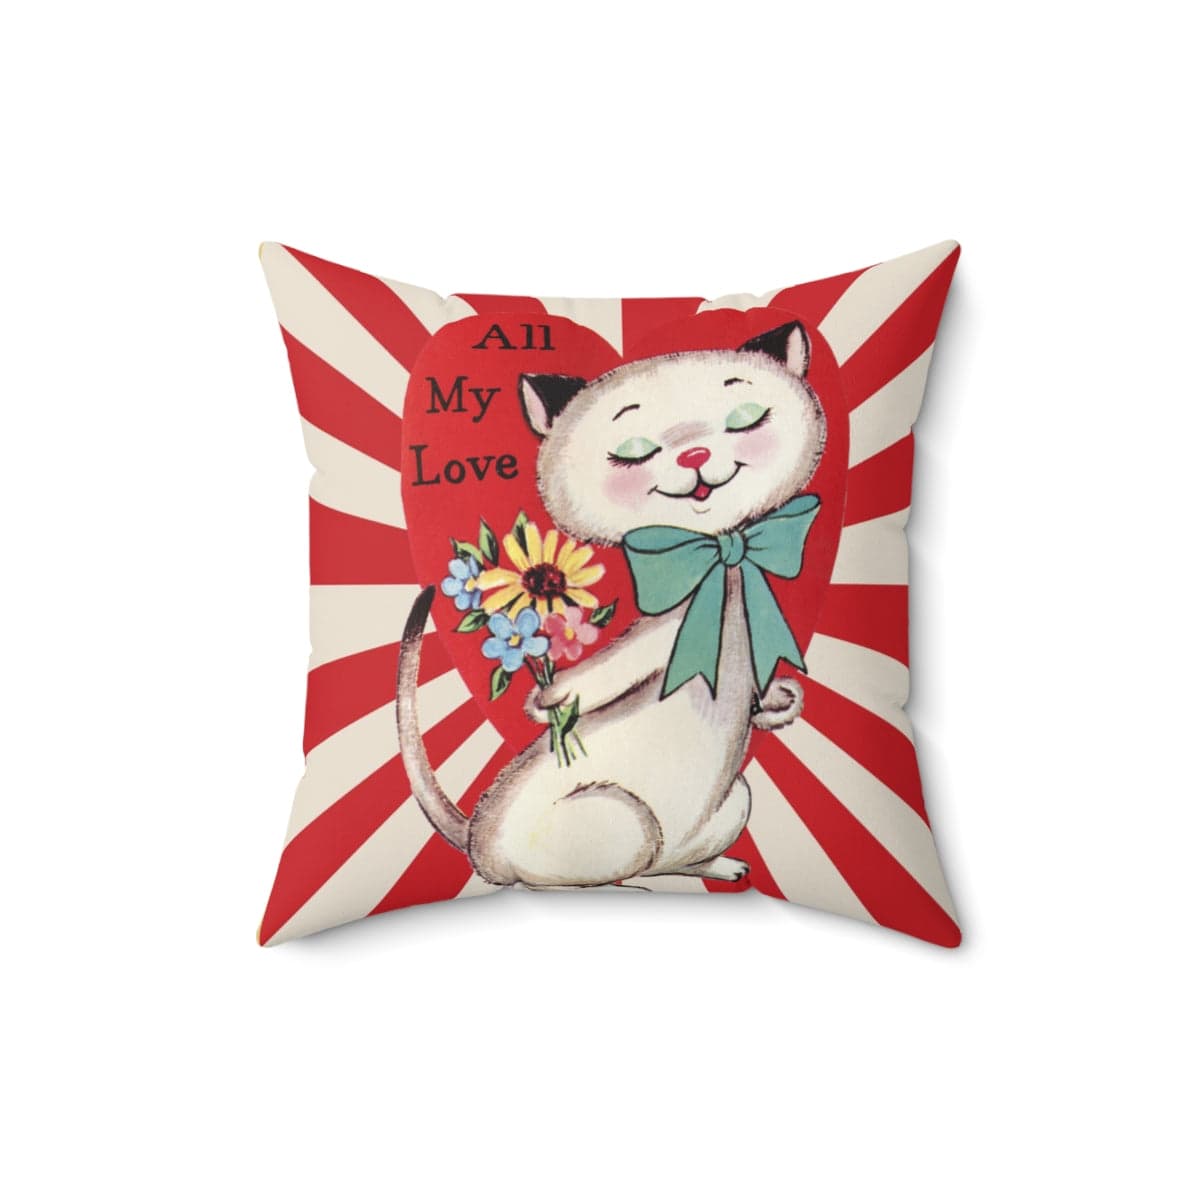 Vintage Valentine Card, Retro White Cat, All My Love Pillow Case ONLY Home Decor 16&quot; × 16&quot;